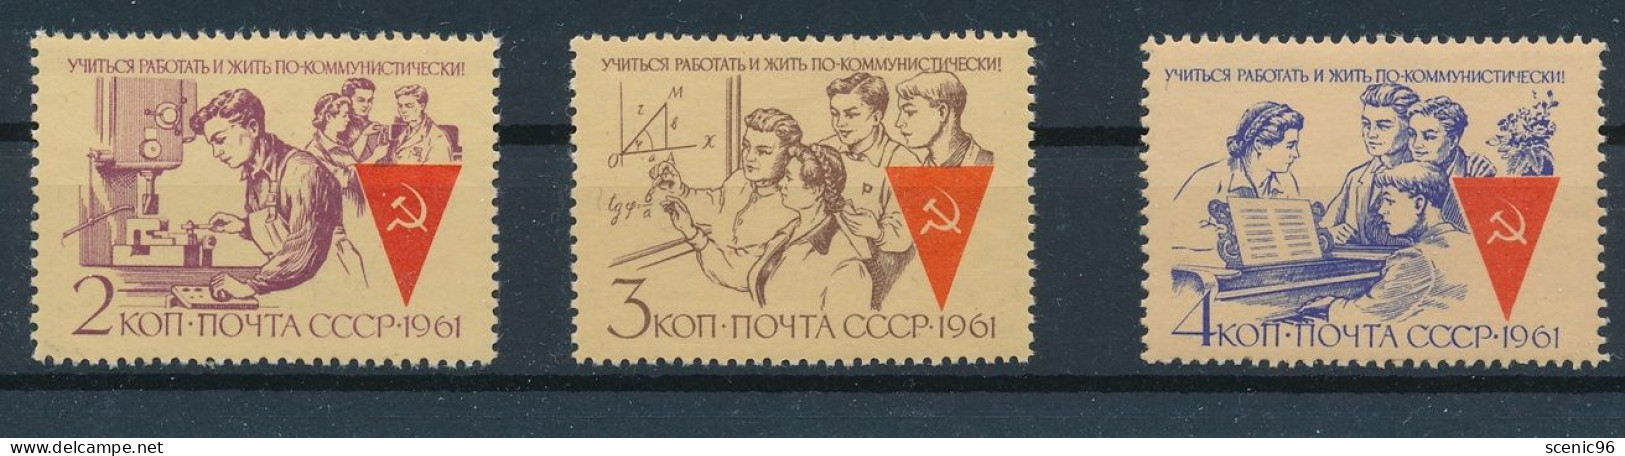 Russia 1961, Communism Perspectives;Mi#2537-38,2553;MNH - Unused Stamps